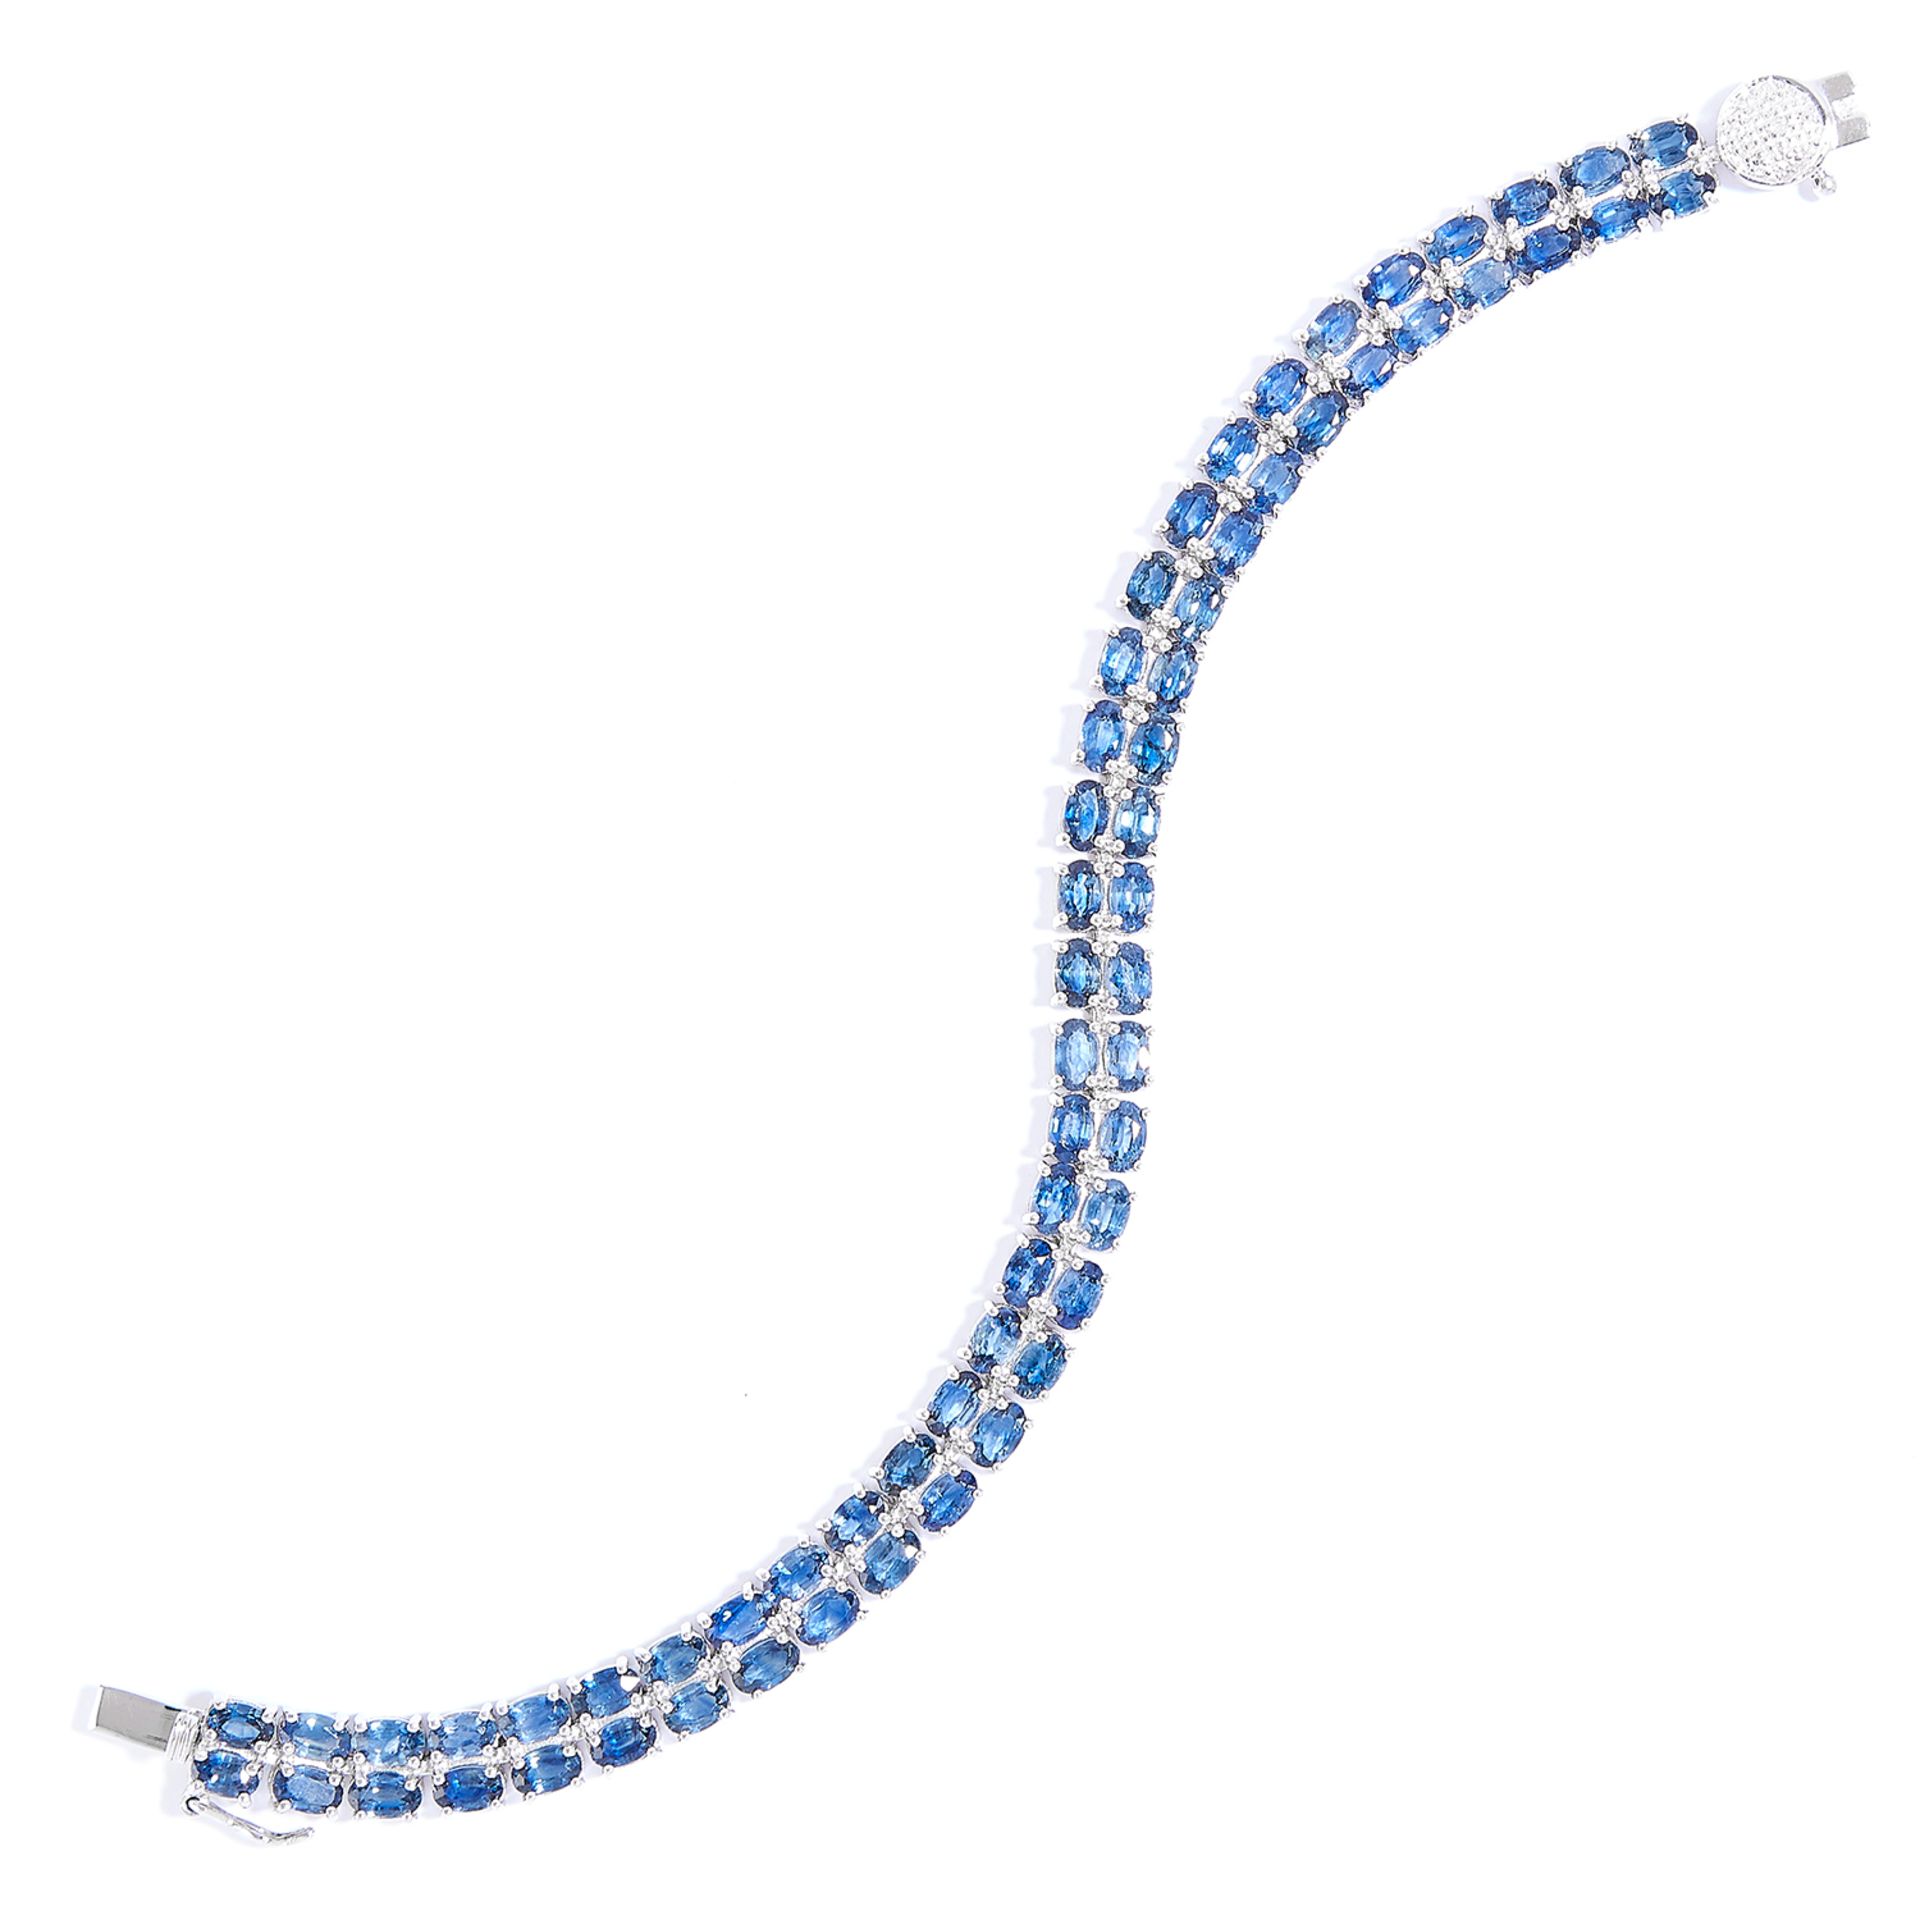 SAPPHIRE AND DIAMOND LINE BRACELET in sterling silver, comprising of two rows of oval cut